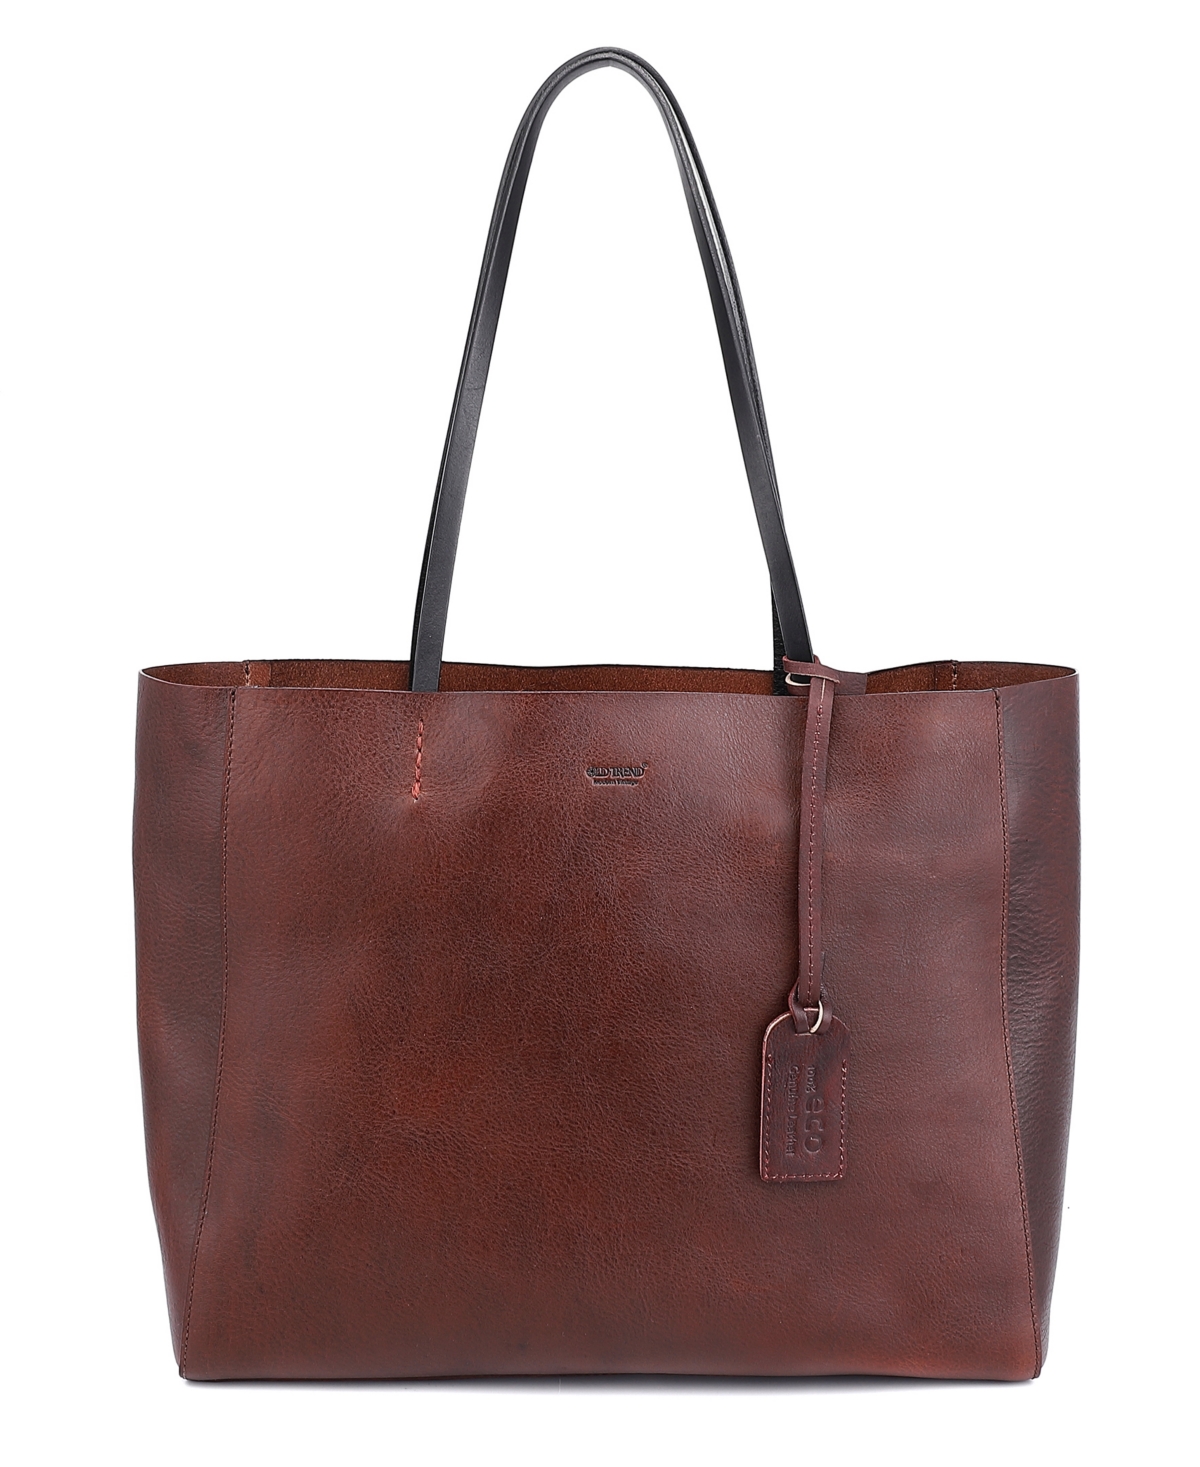 Women's Genuine Leather Out West Tote Bag - Brown